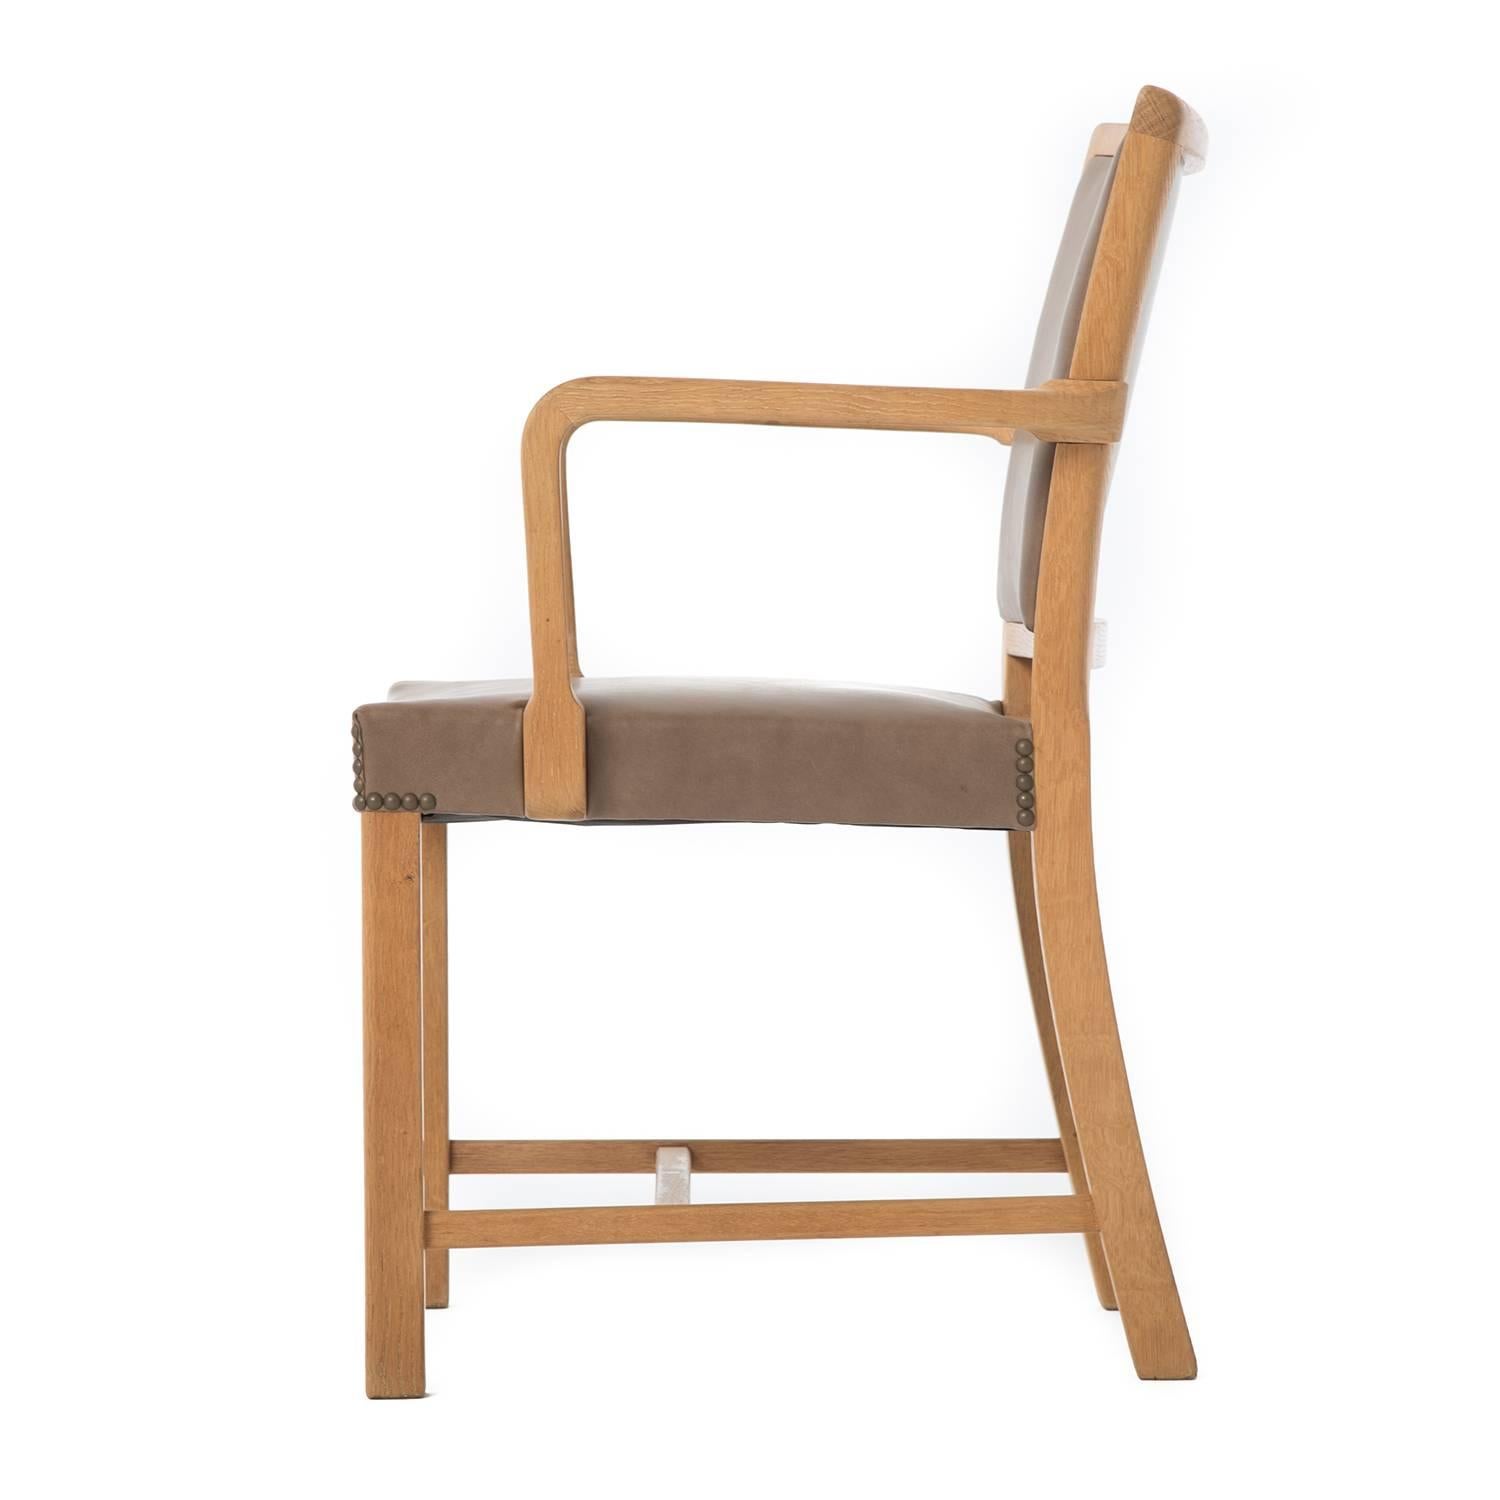 An older and more traditional occasional chair in white oak and leather. Newly restored and in excellent condition. Design by Mogens Koch. 

Professional, skilled furniture restoration is an integral part of what we do every day. Our goal is to